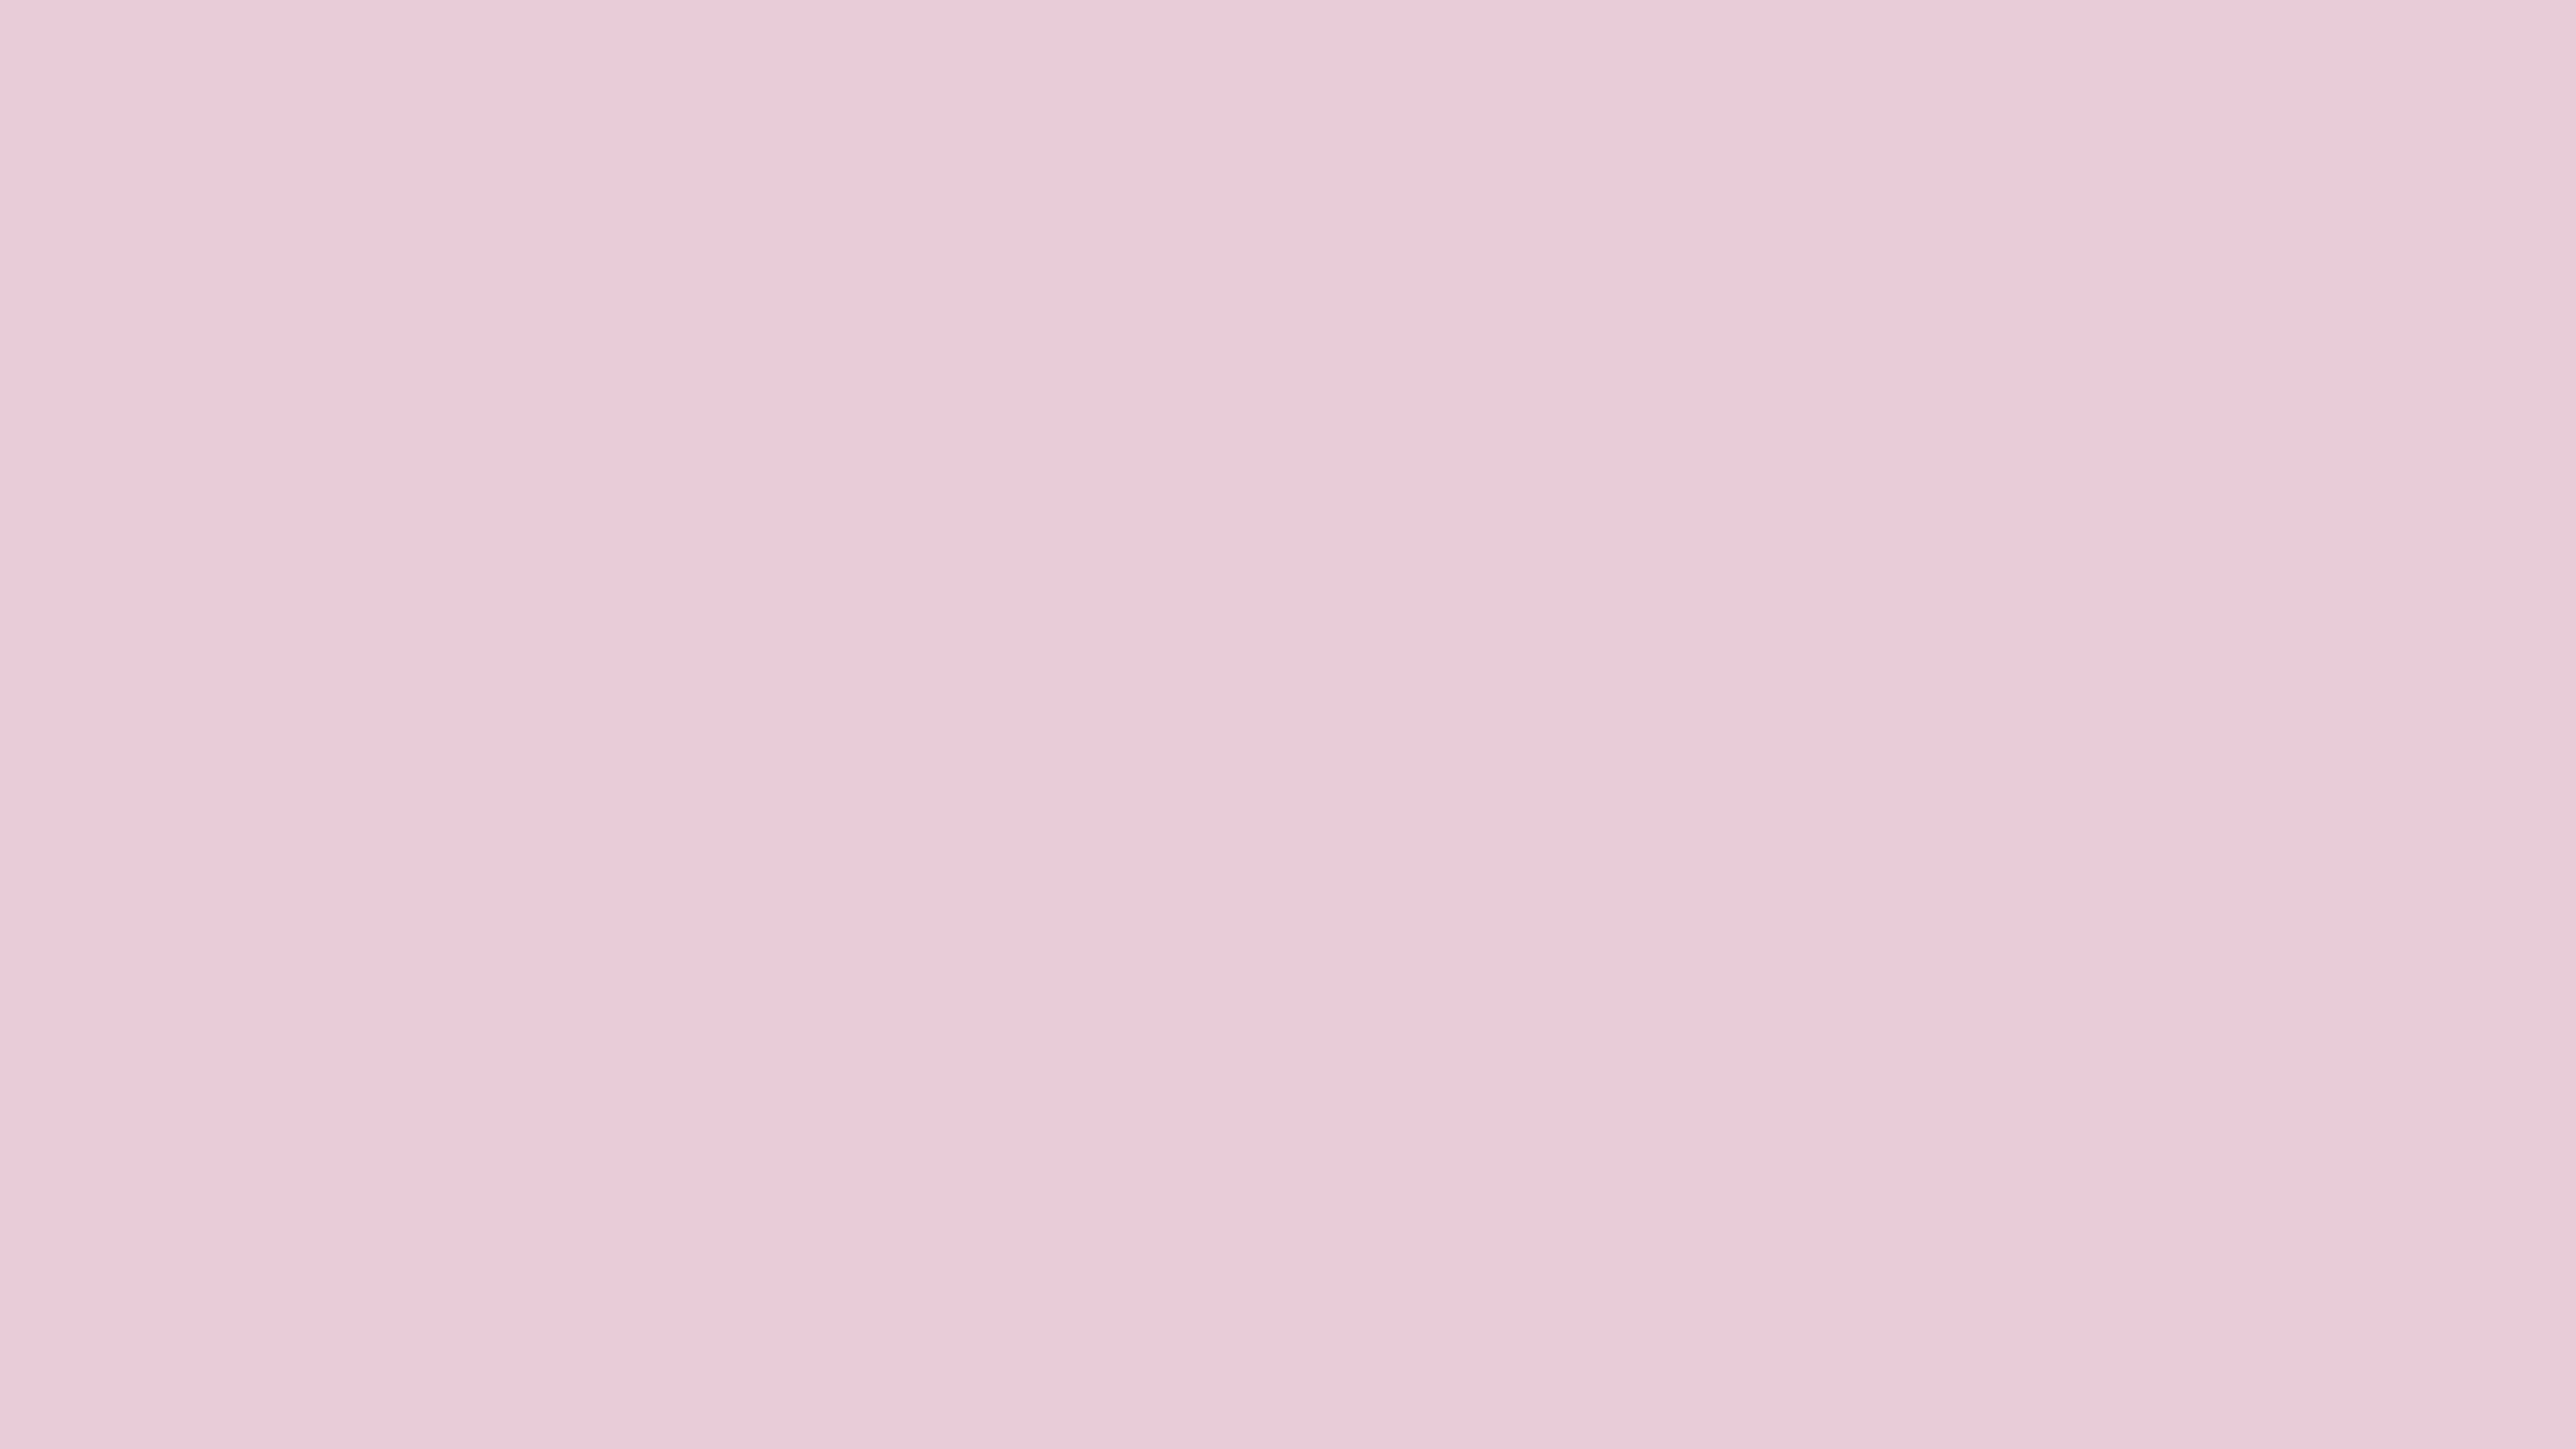 7680x4320 Queen Pink Solid Color Background